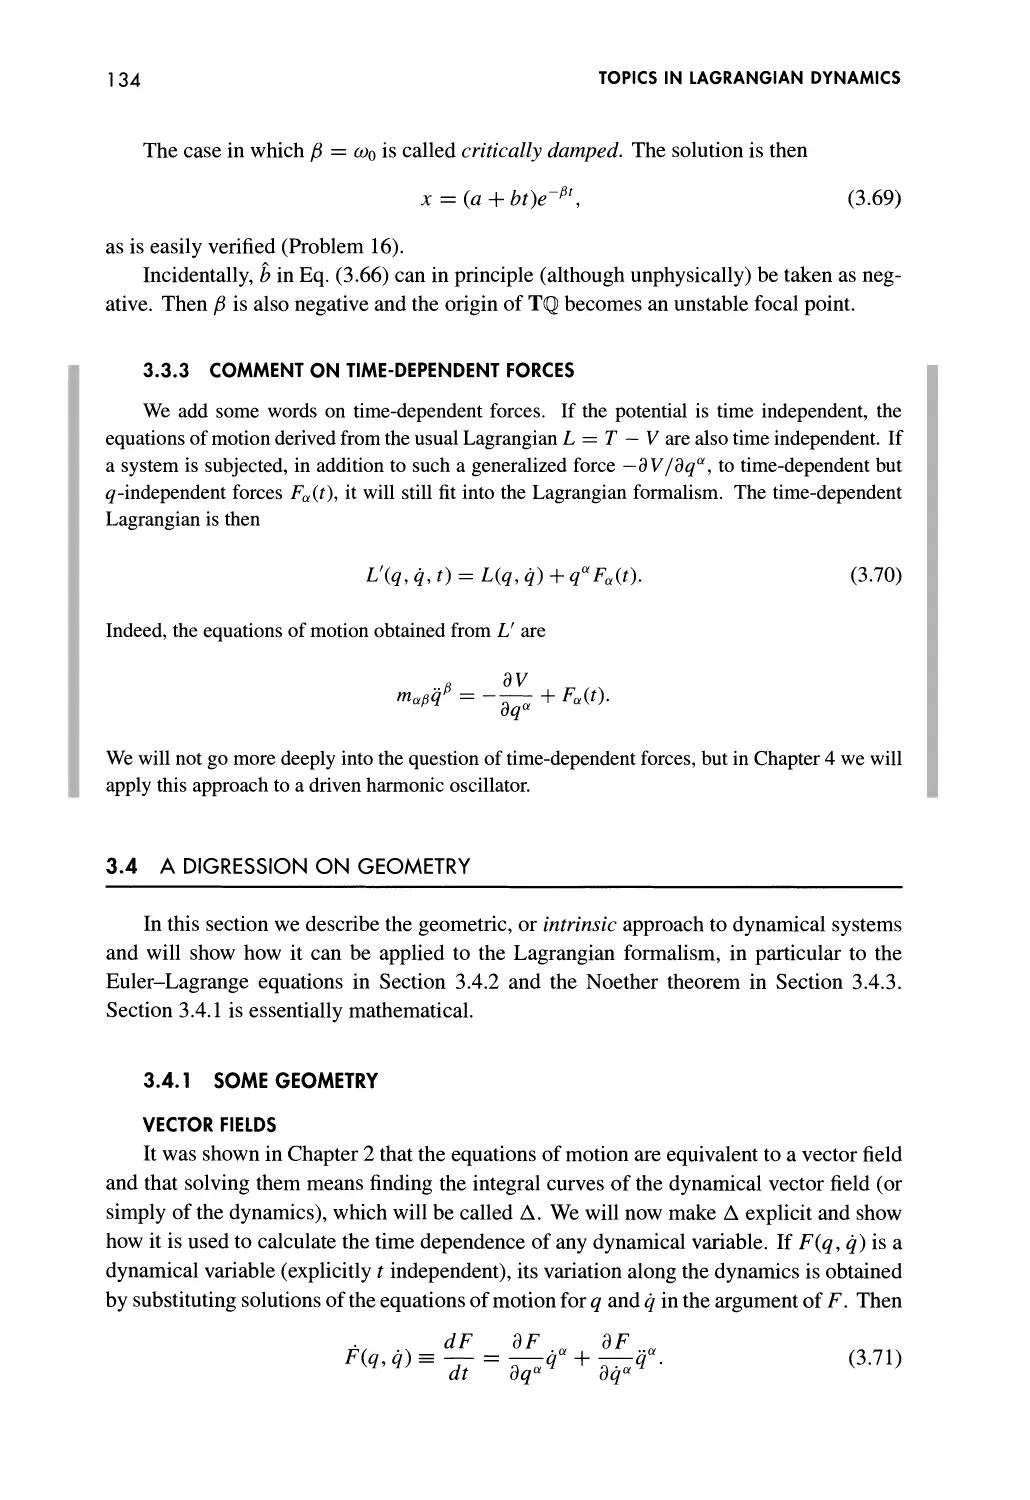 3.3.3 Comment on Time-Dependent Forces
3.4 A Digression on Geometry